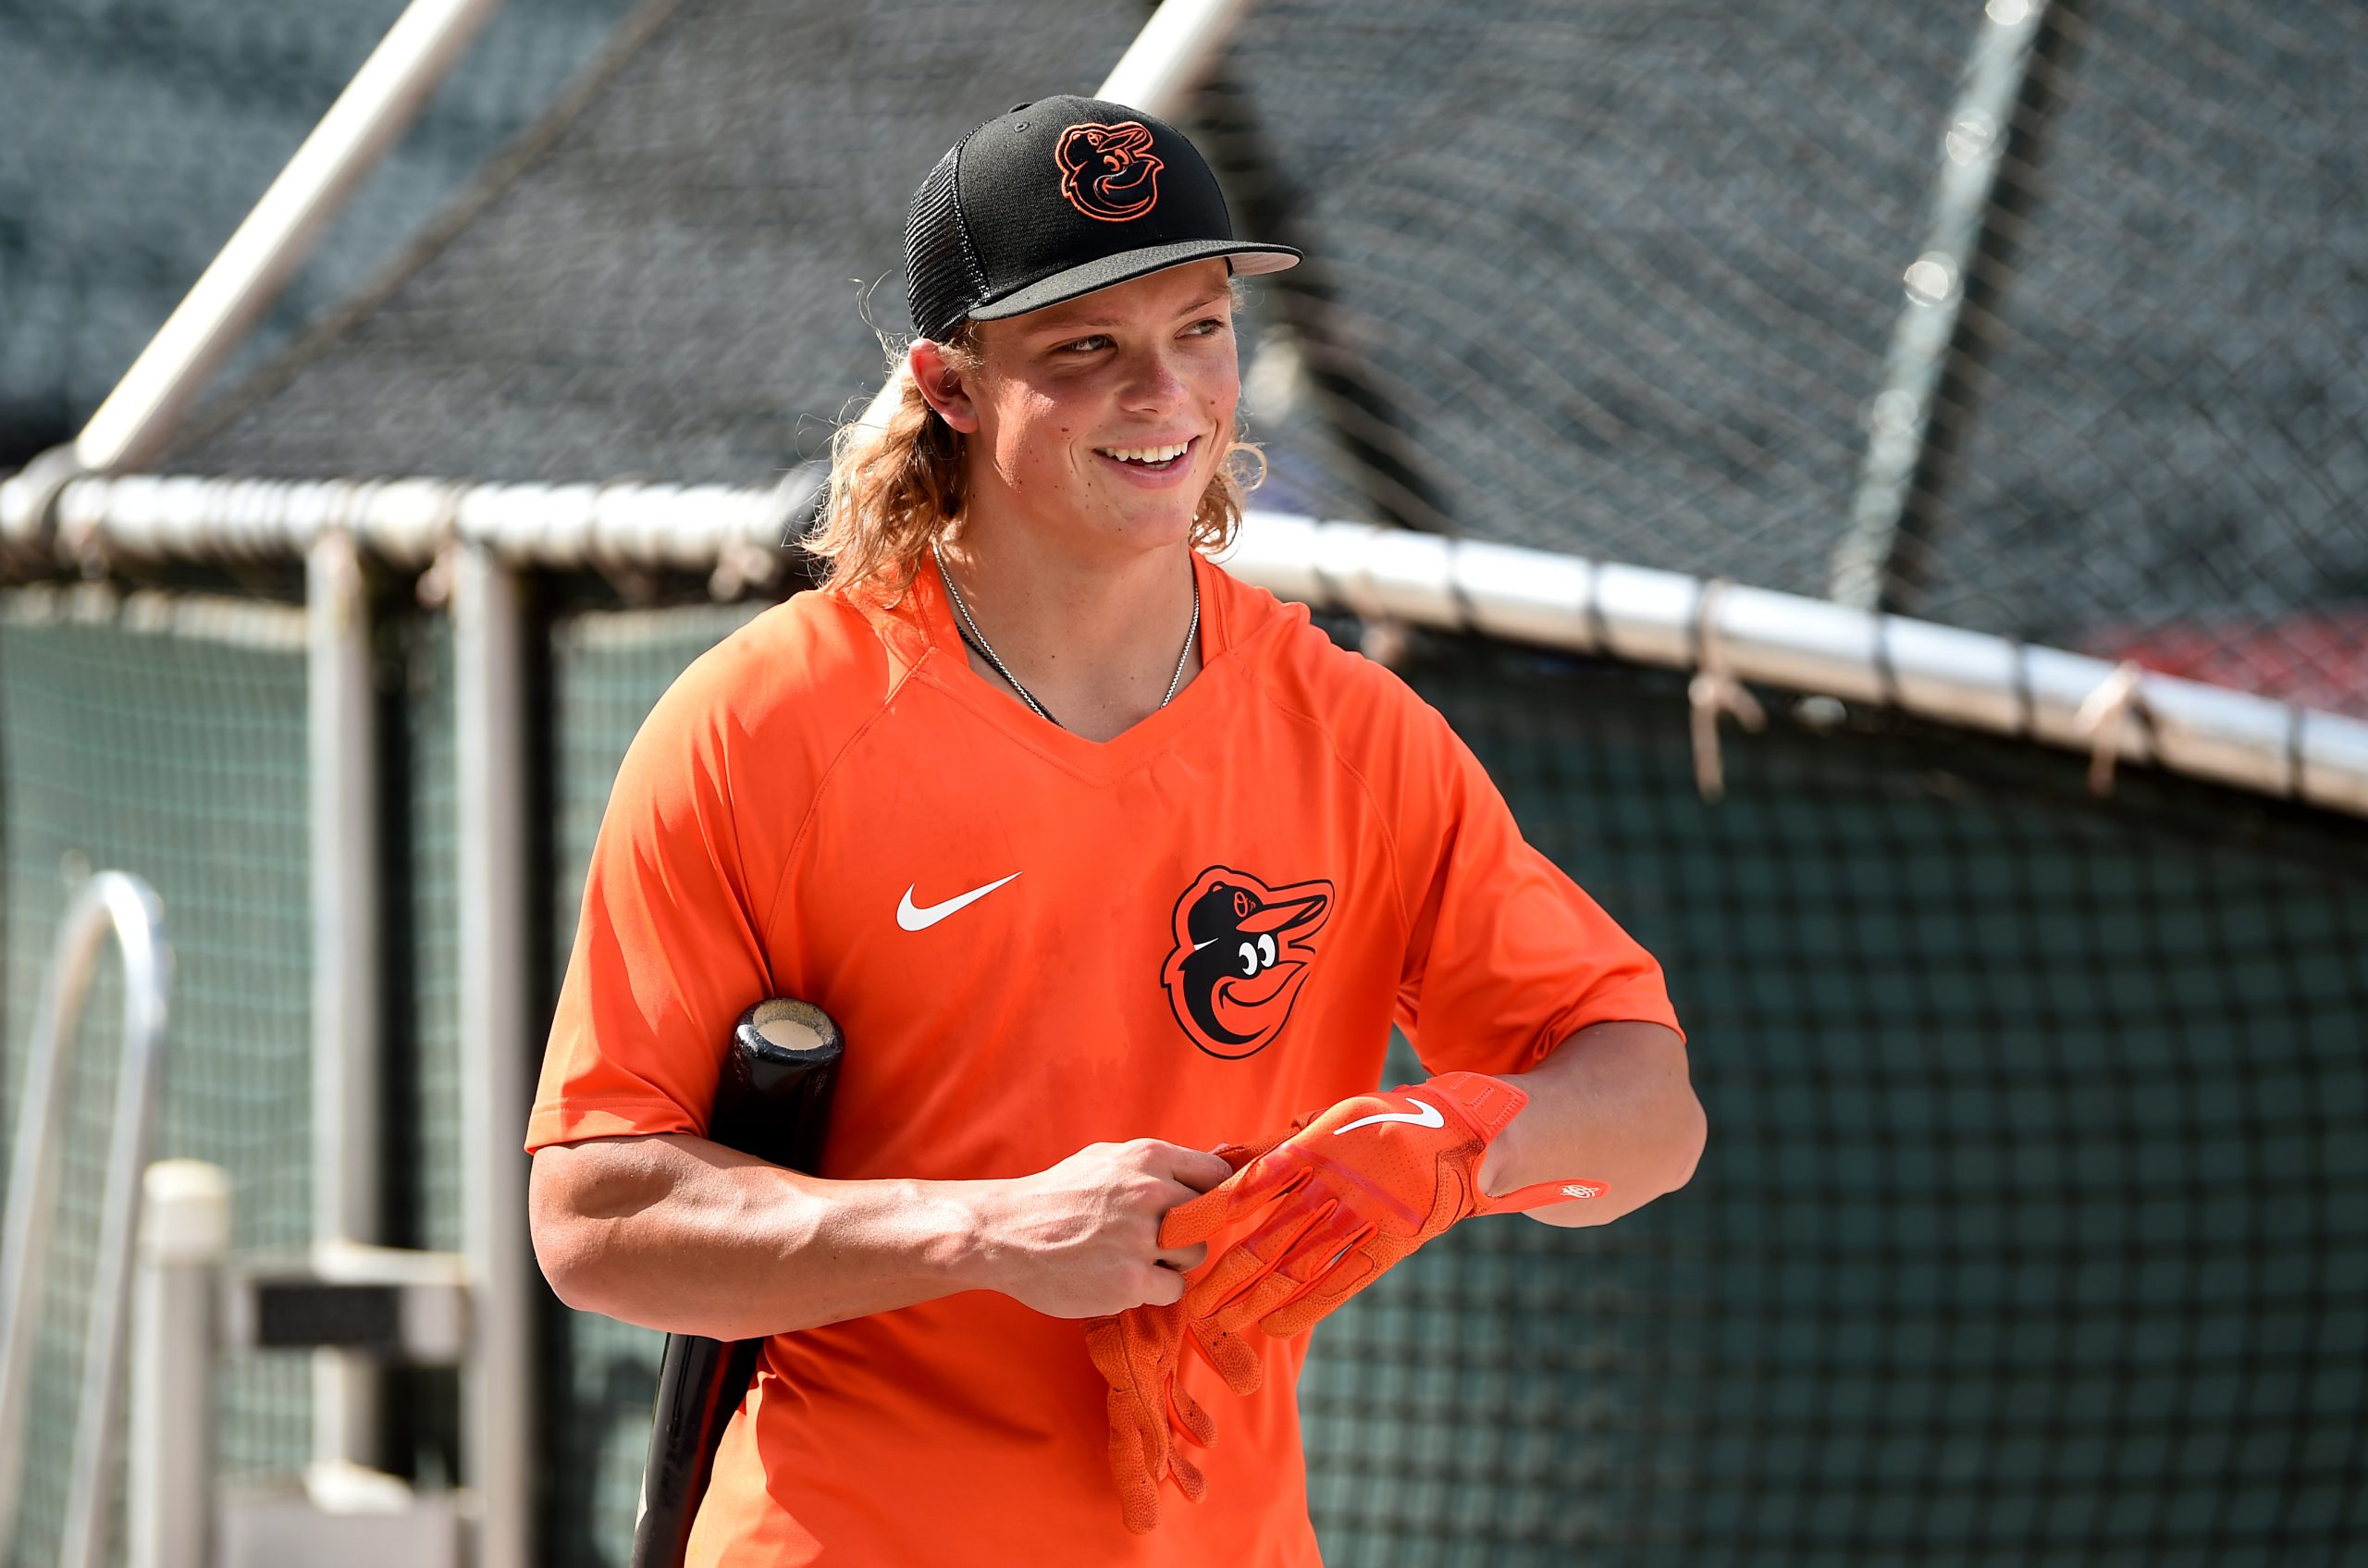 Orioles yankees mlb jersey mantle minor league recap 8/20: Jackson Holliday  hits his first pro homer